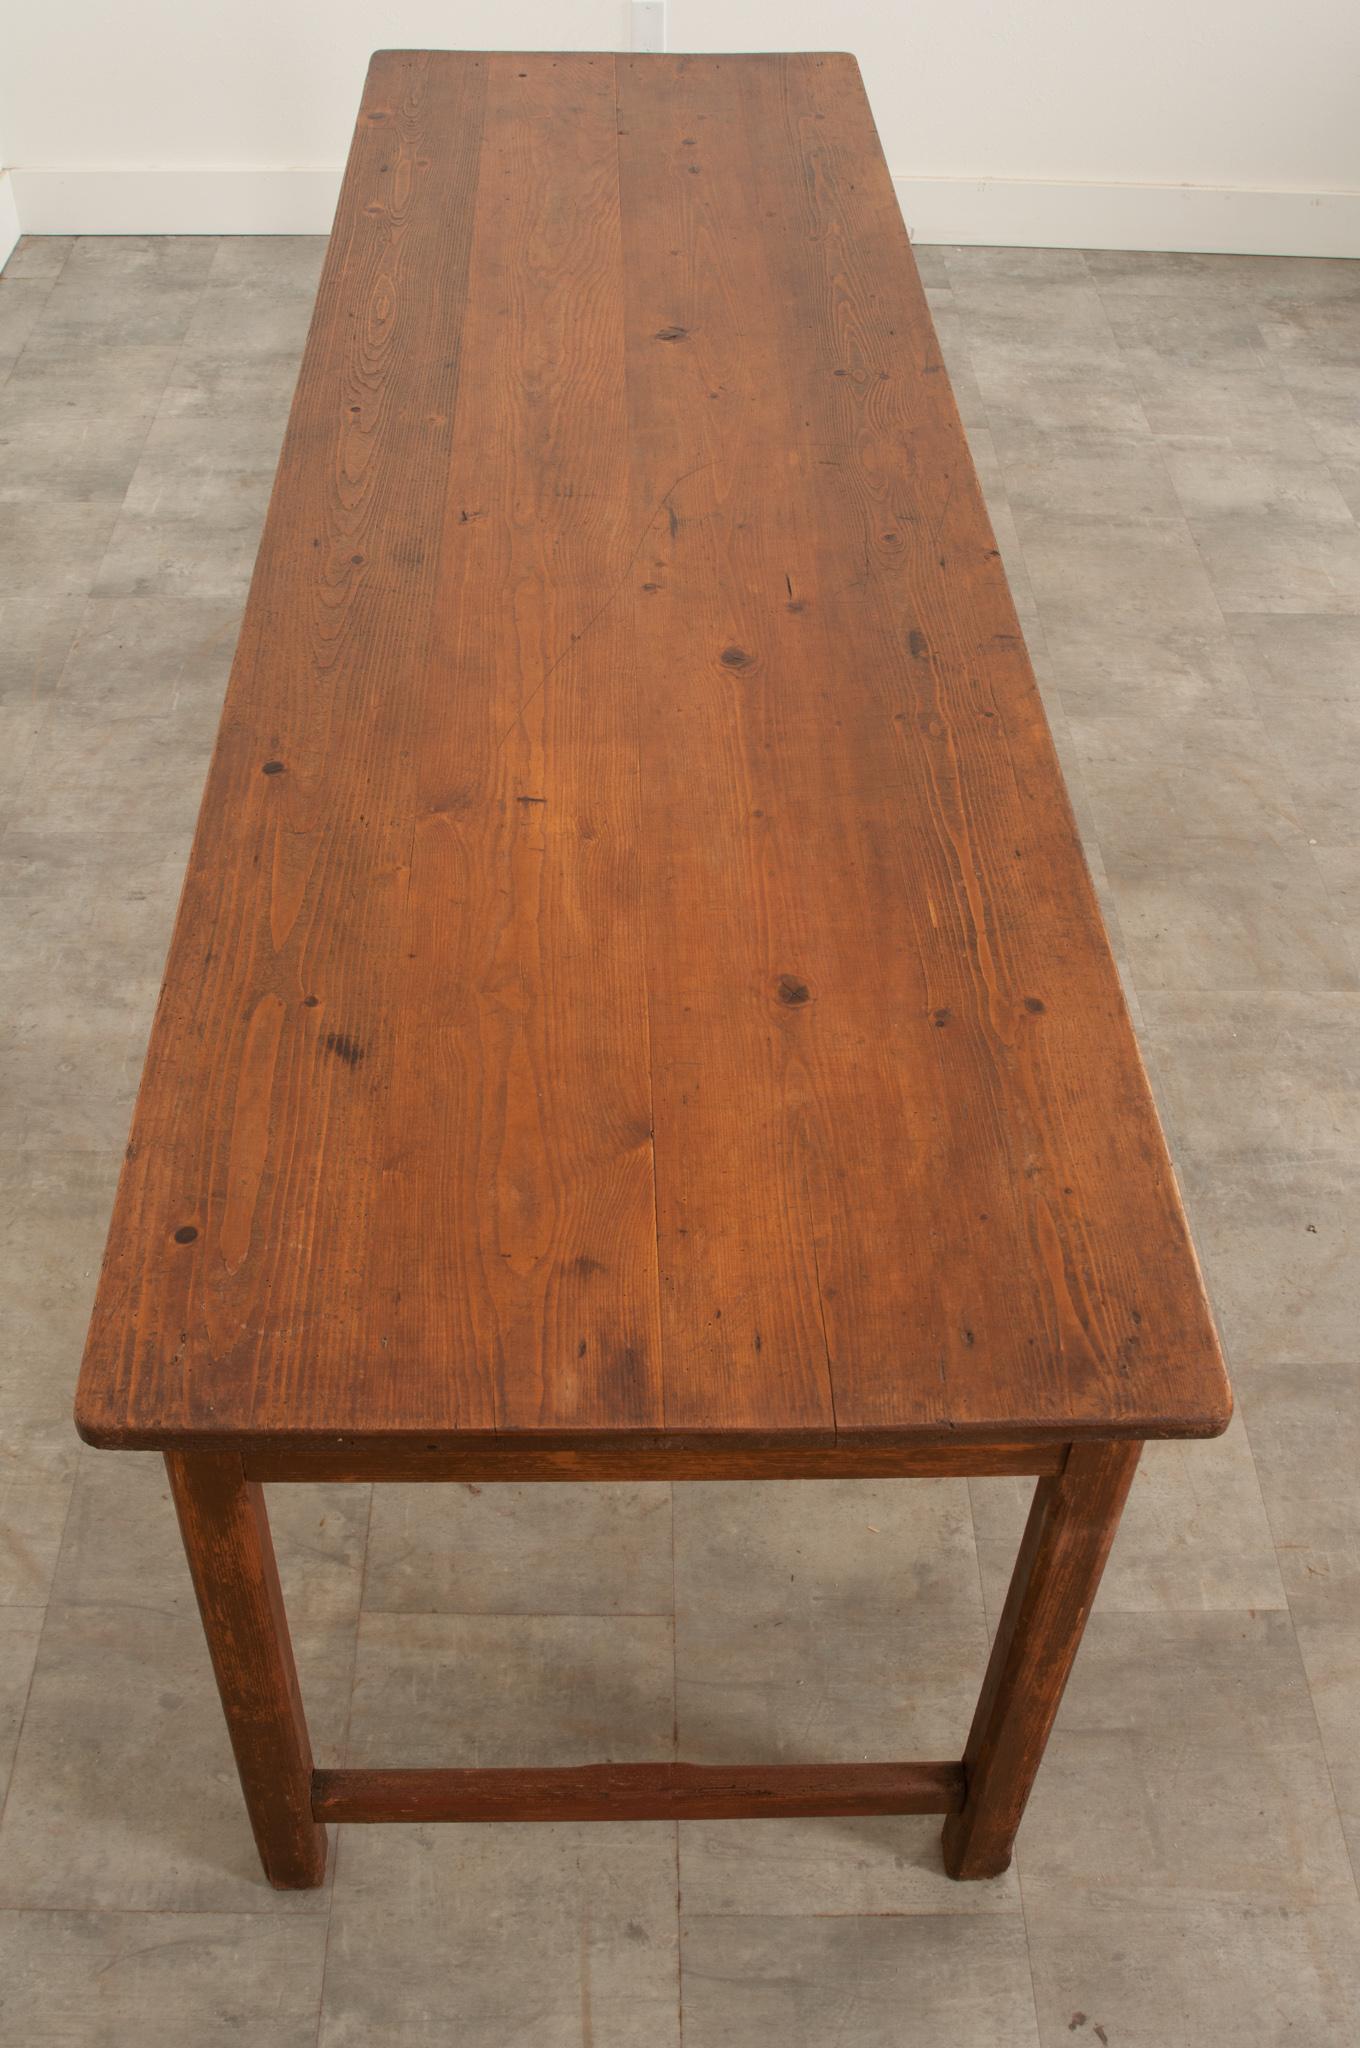 French Pine Farm Table from Burgundy In Good Condition For Sale In Baton Rouge, LA